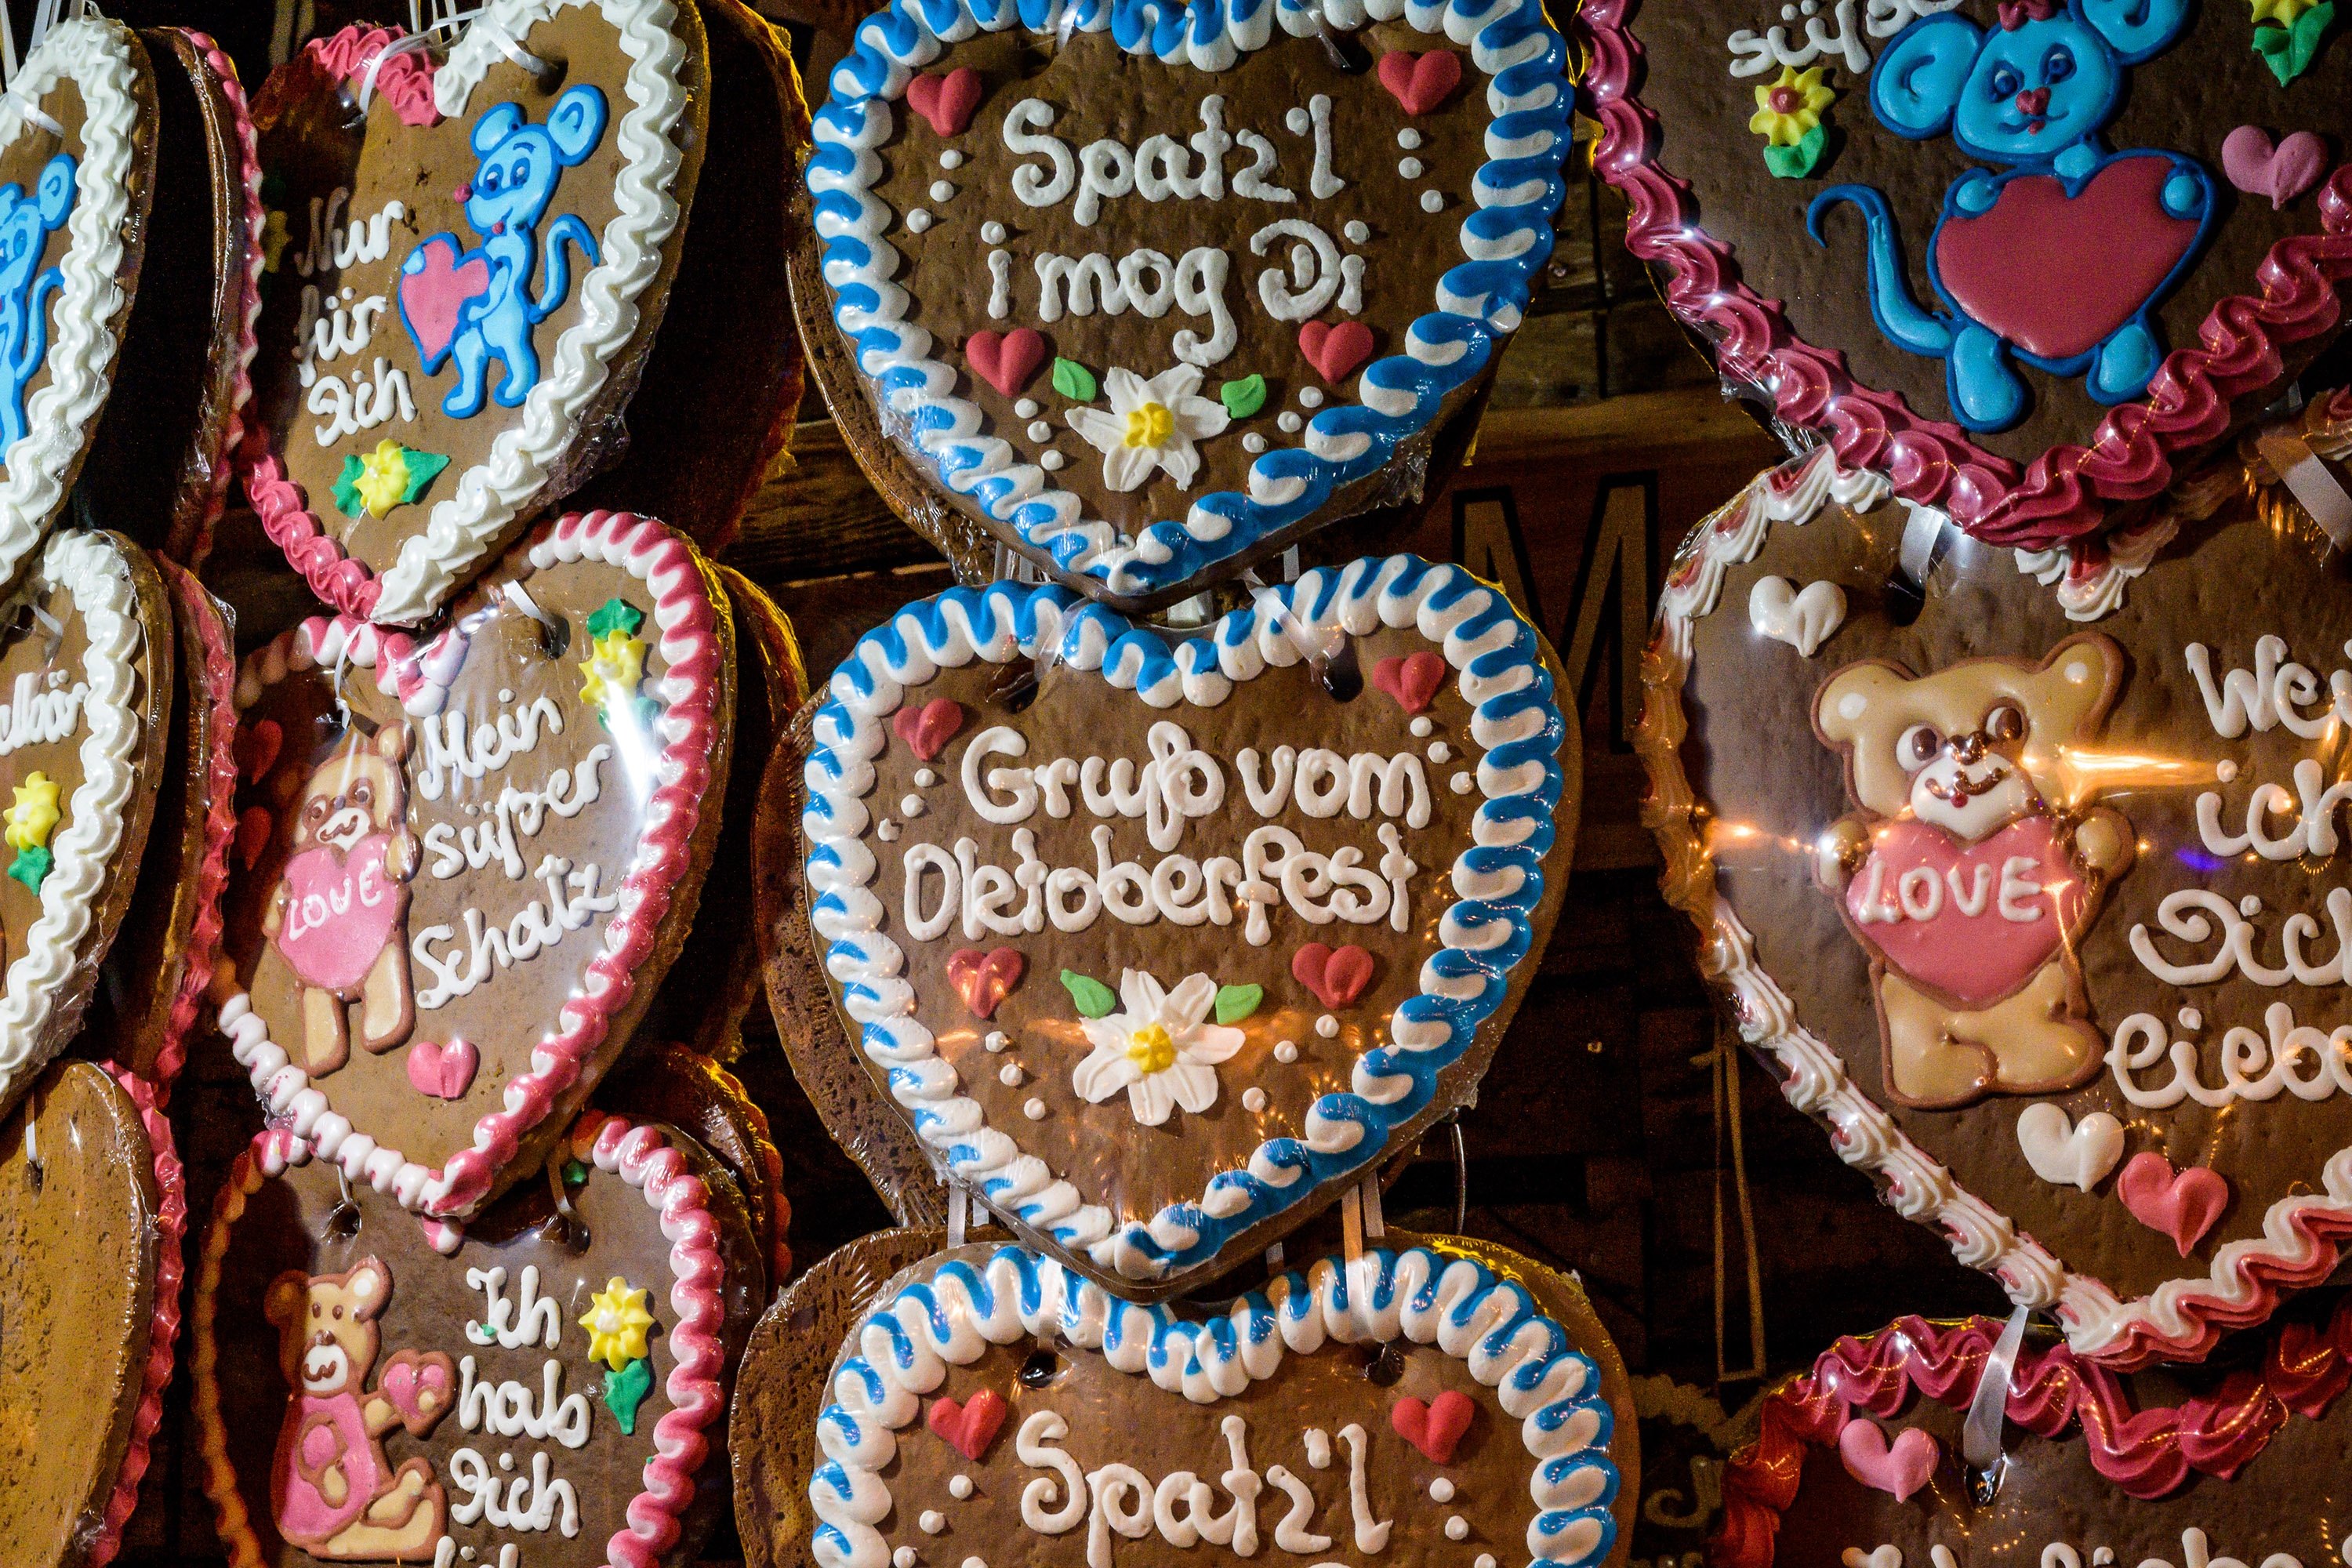 A stall sells traditional sweets and German gingerbread cookies at Oktoberfest in Koblenz, Germany, Sept. 27, 2019. (Shutterstock Photo)